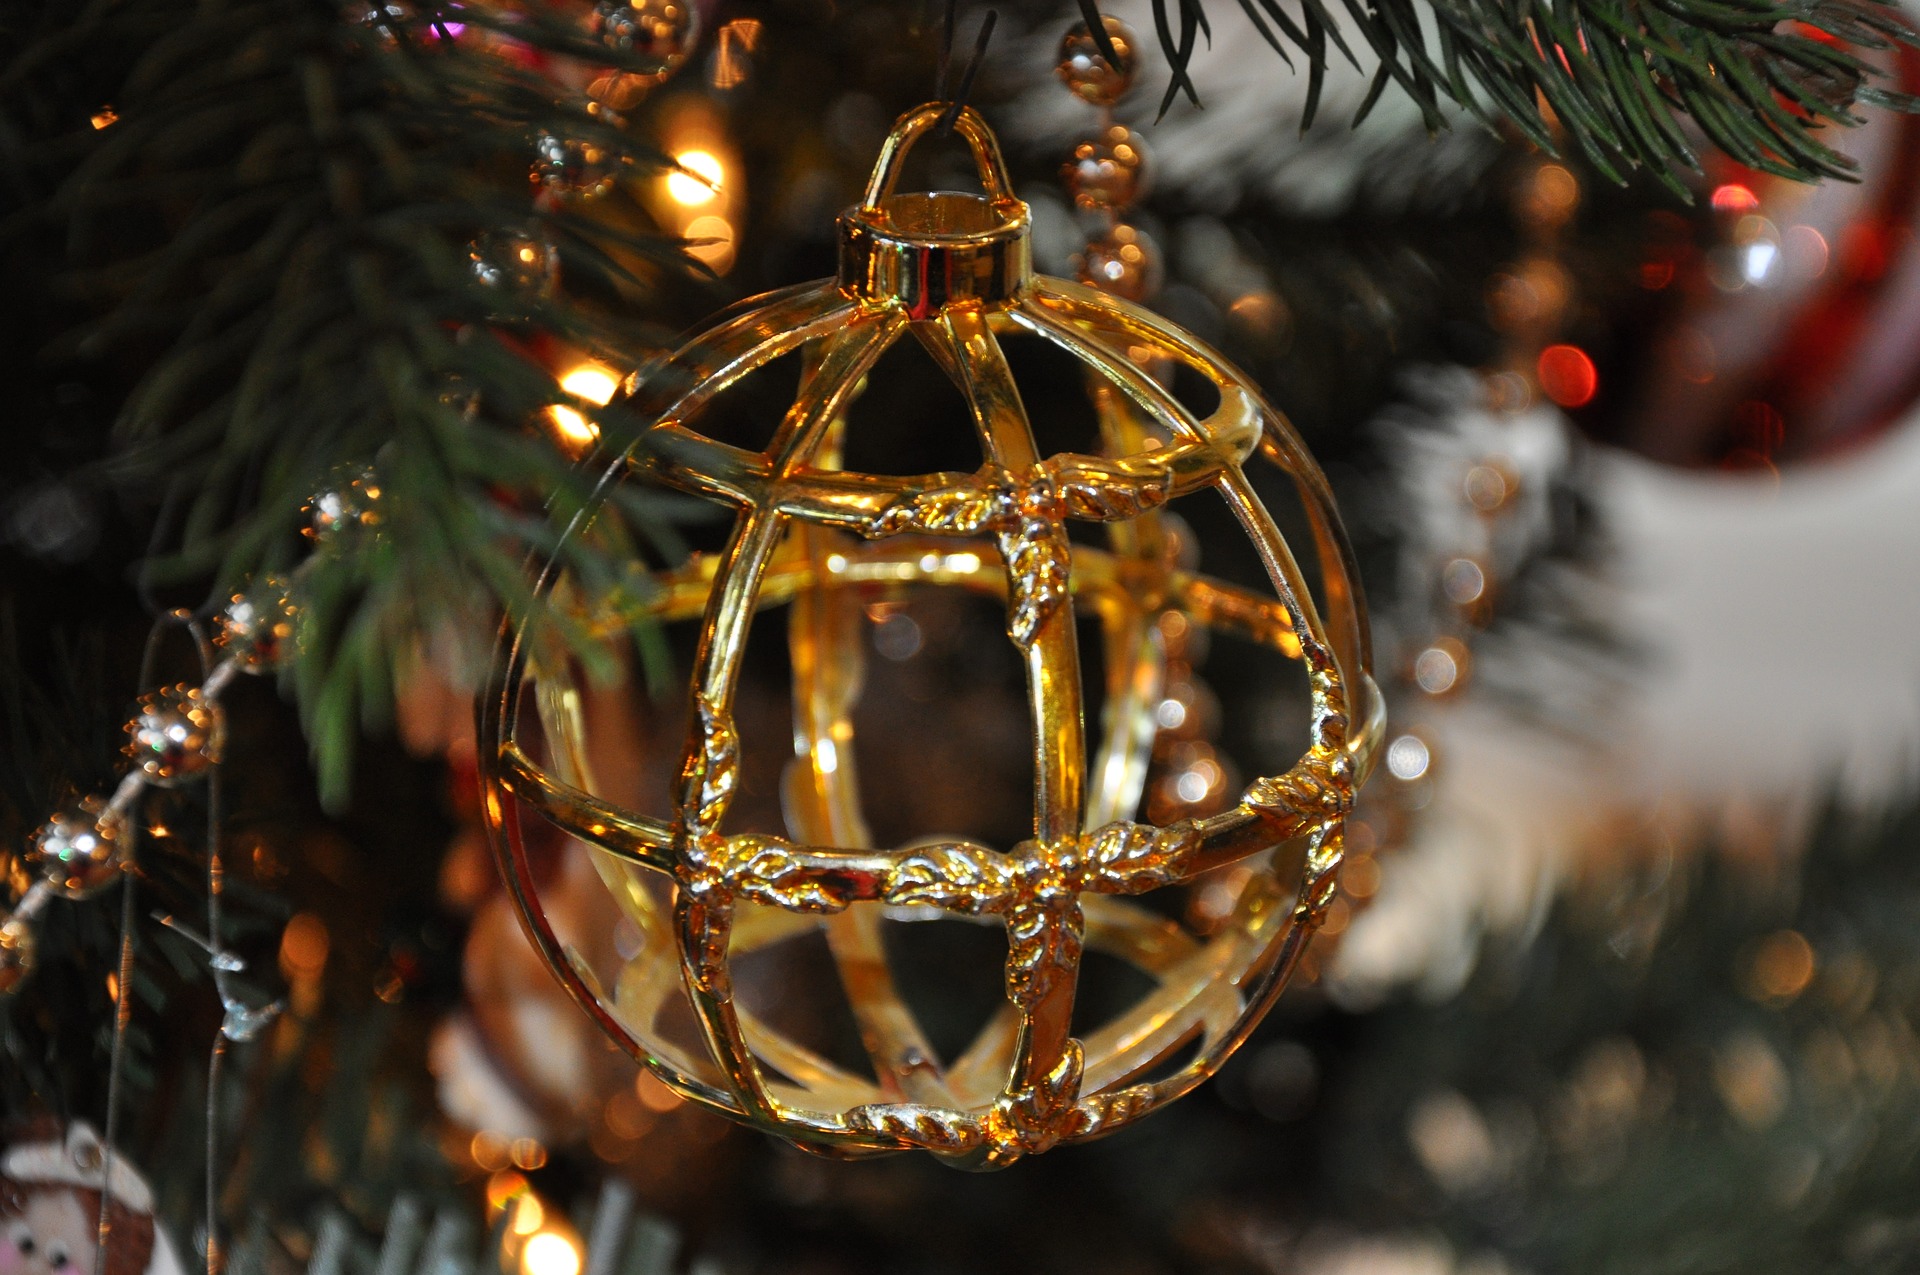 How to Care for Old Christmas Ornaments - Family Tree